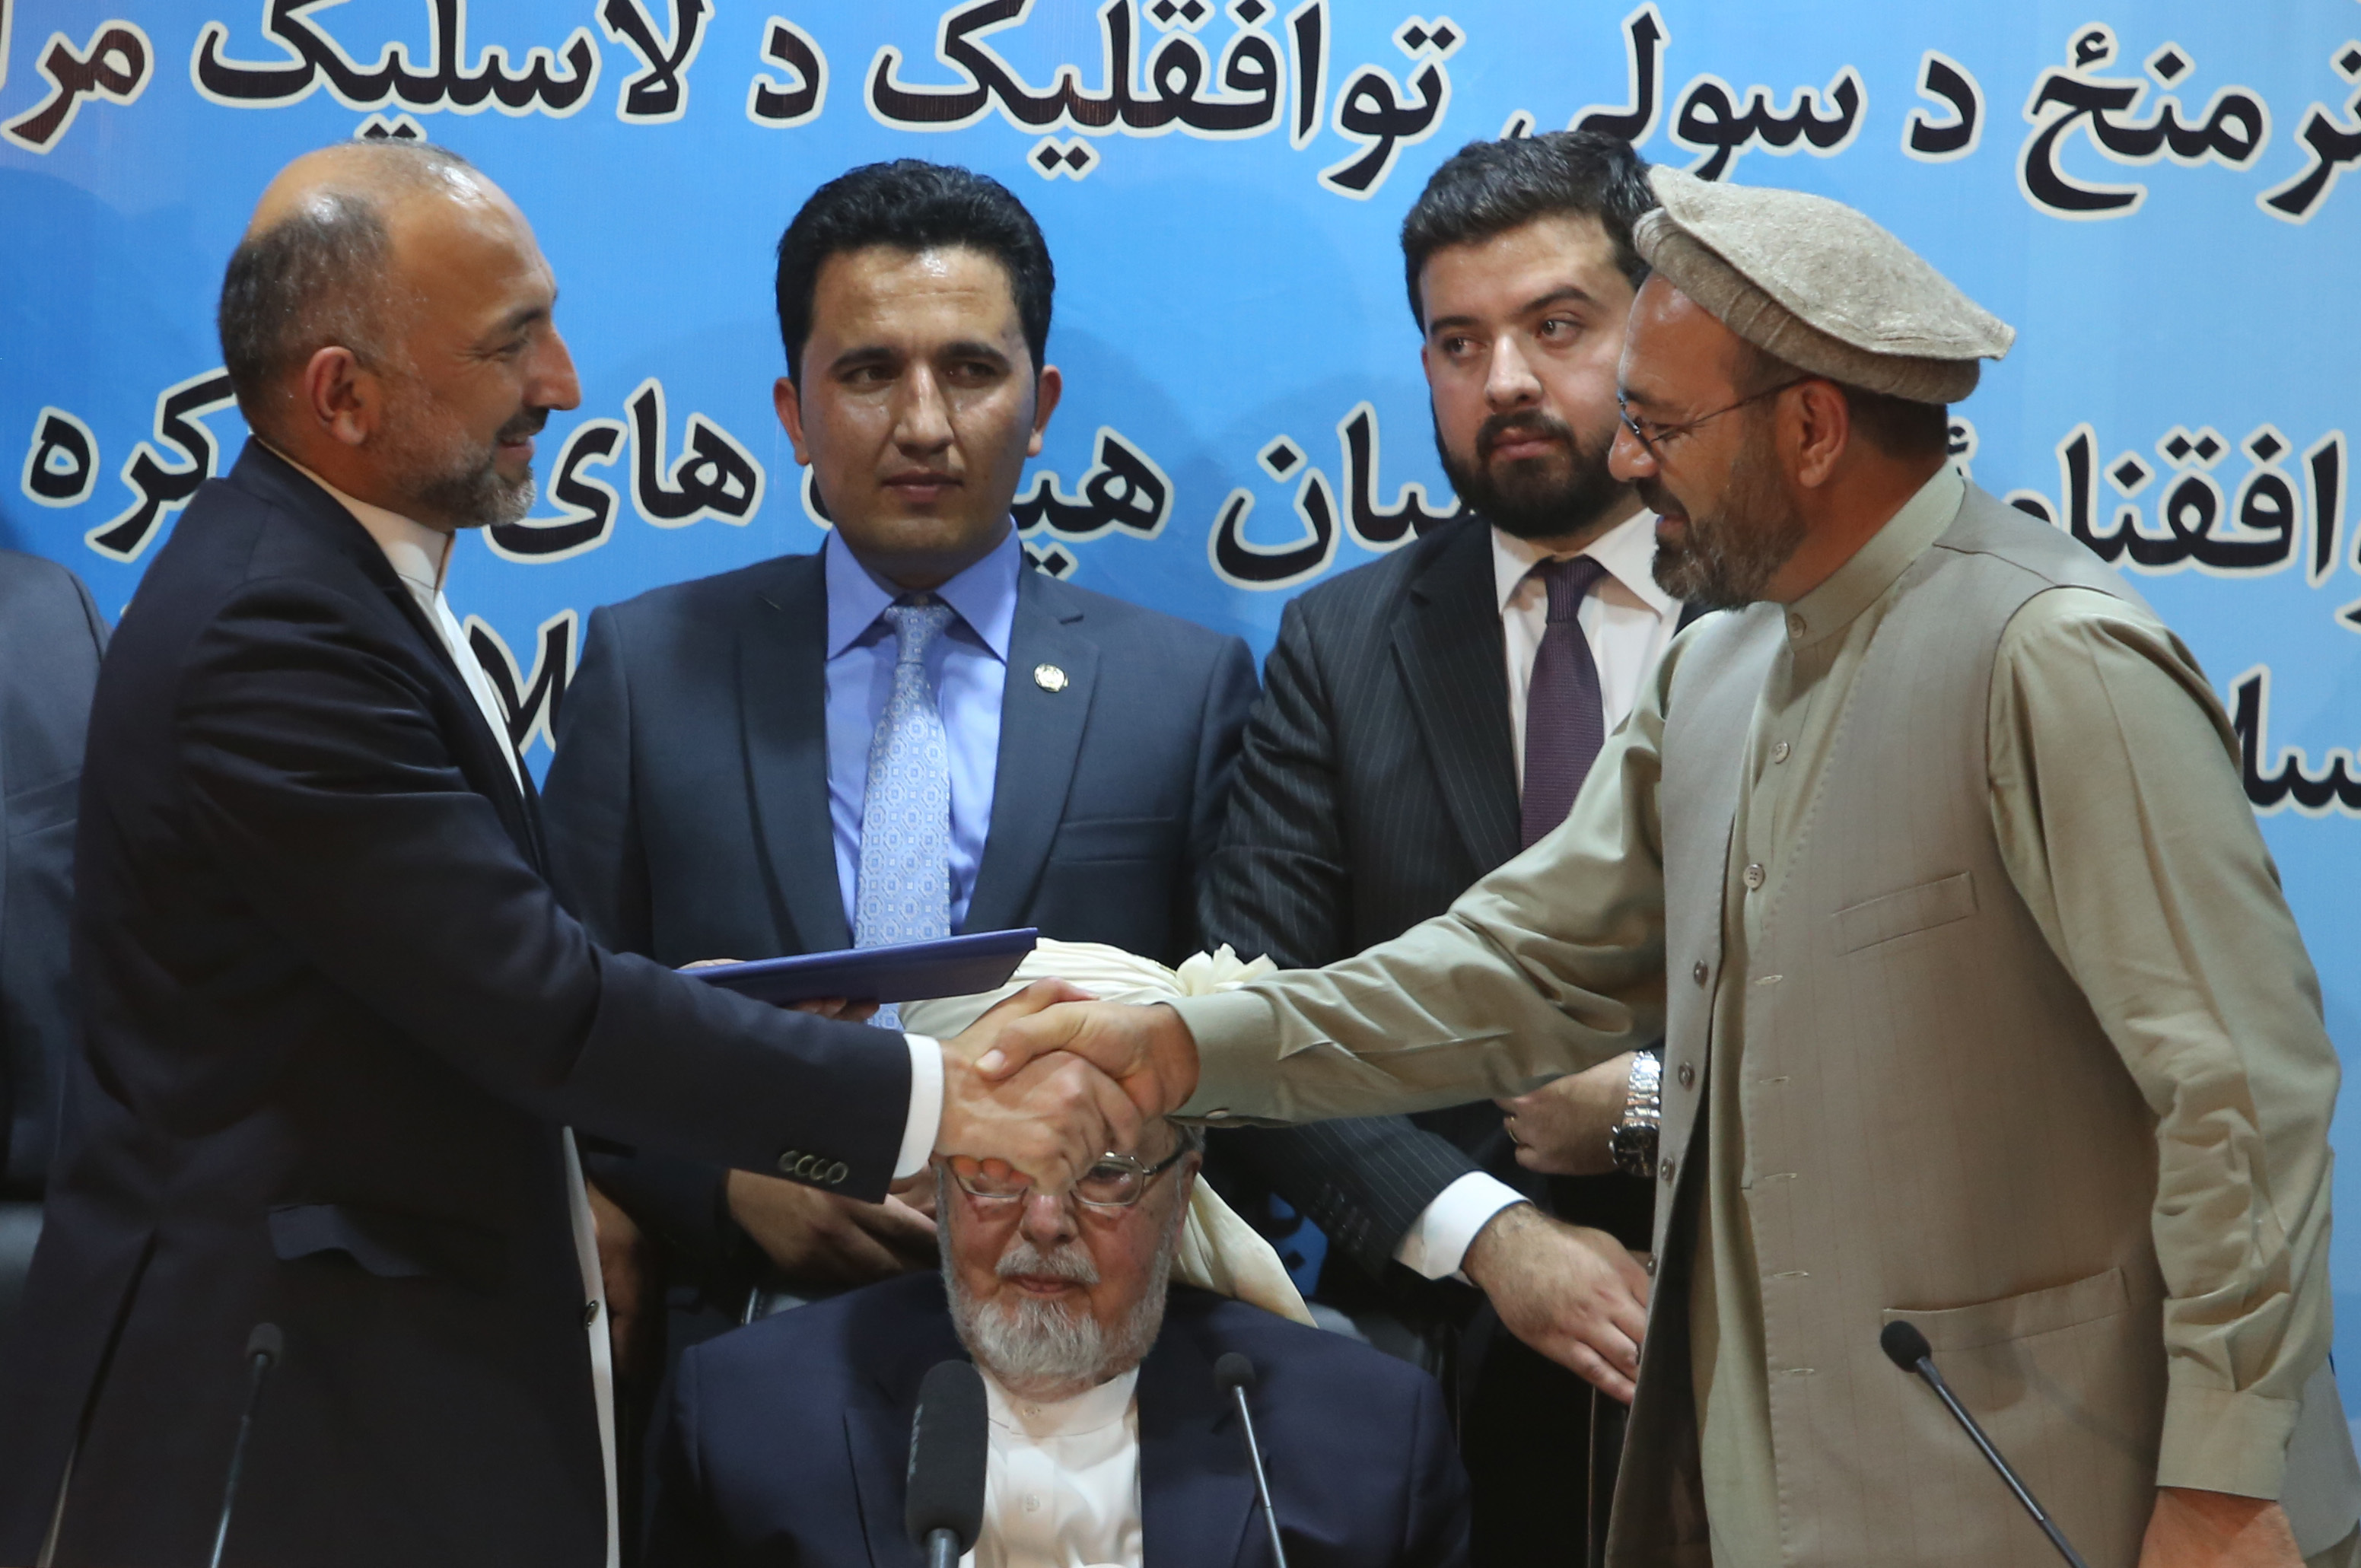 Afghanistan national security adviser Mohammad Hanif Atmar, left, and Amin Karim, representative of Gulbuddin Hekmatyar, right, shake hands after signing a peace deal in Kabul, Afghanistan, Thursday, Sept. 22, 2016. (Rahmat Gul—AP)